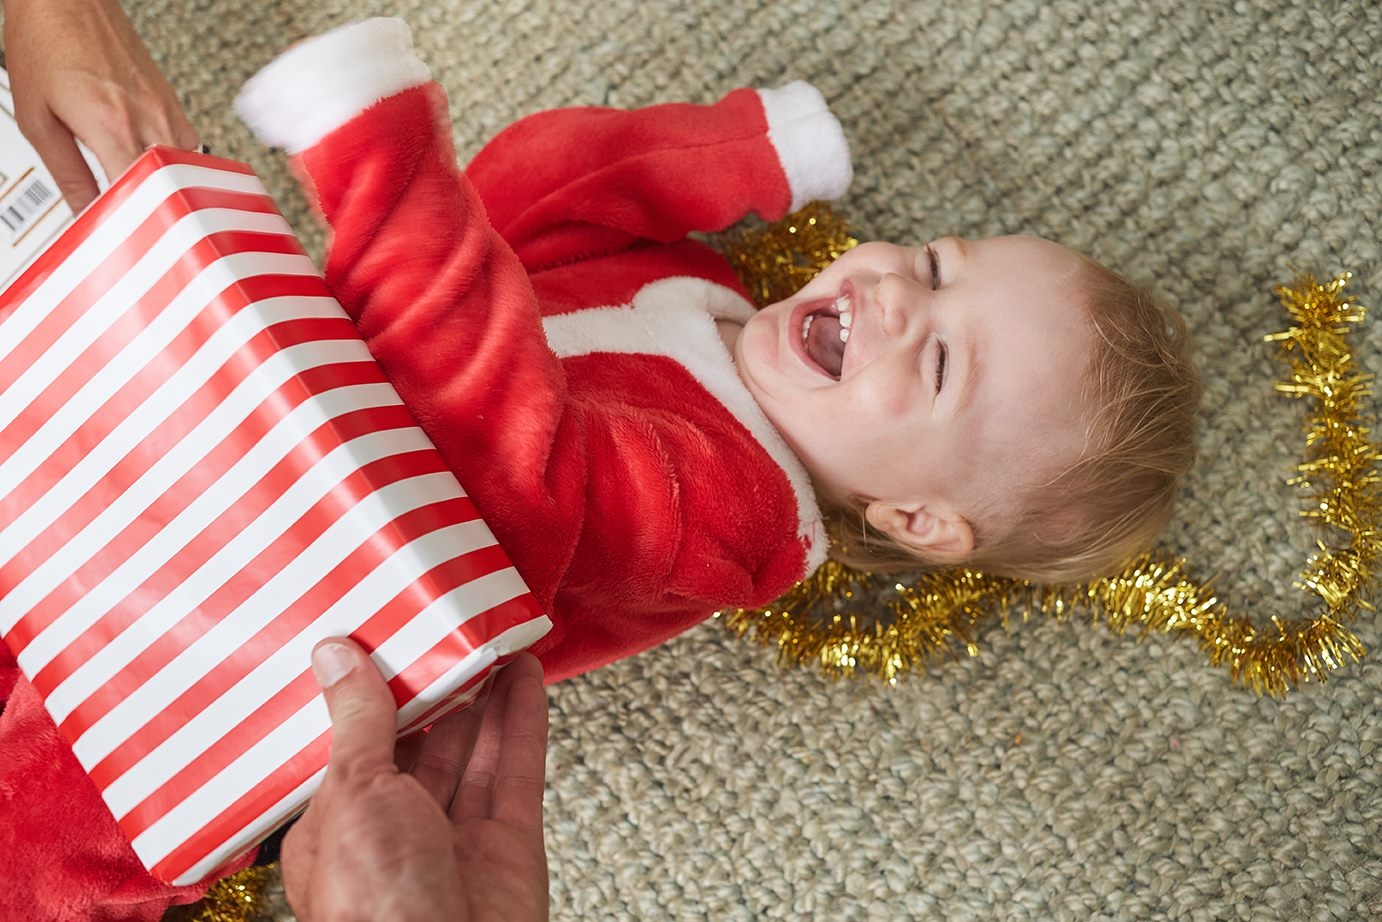 Christmas gift ideas for babies and toddlers